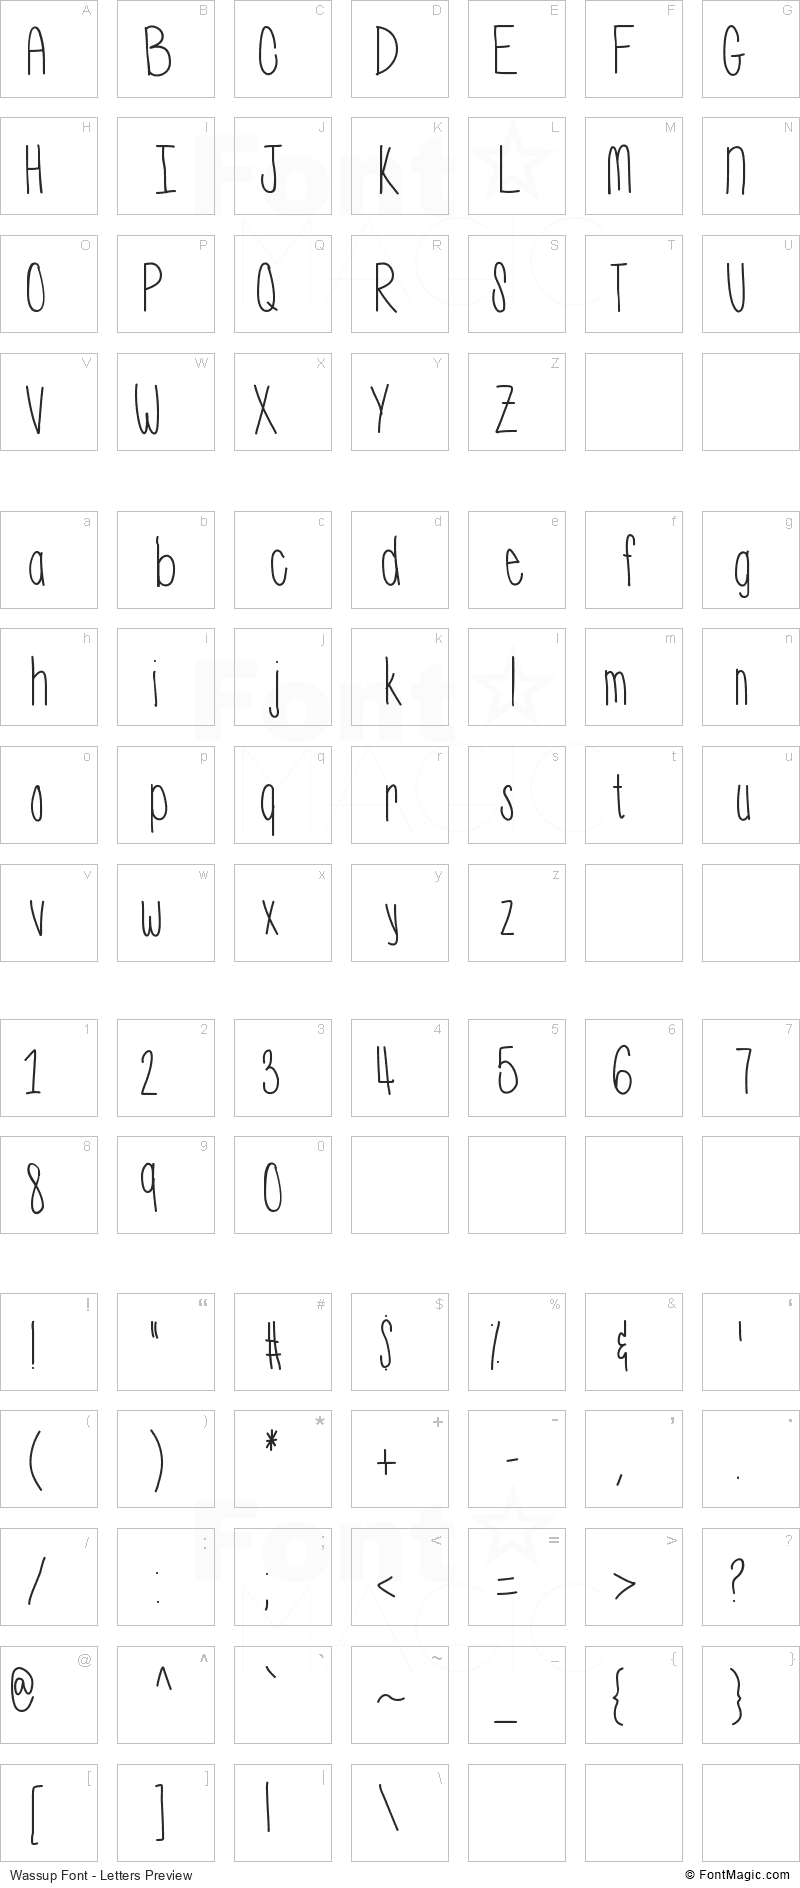 Wassup Font - All Latters Preview Chart